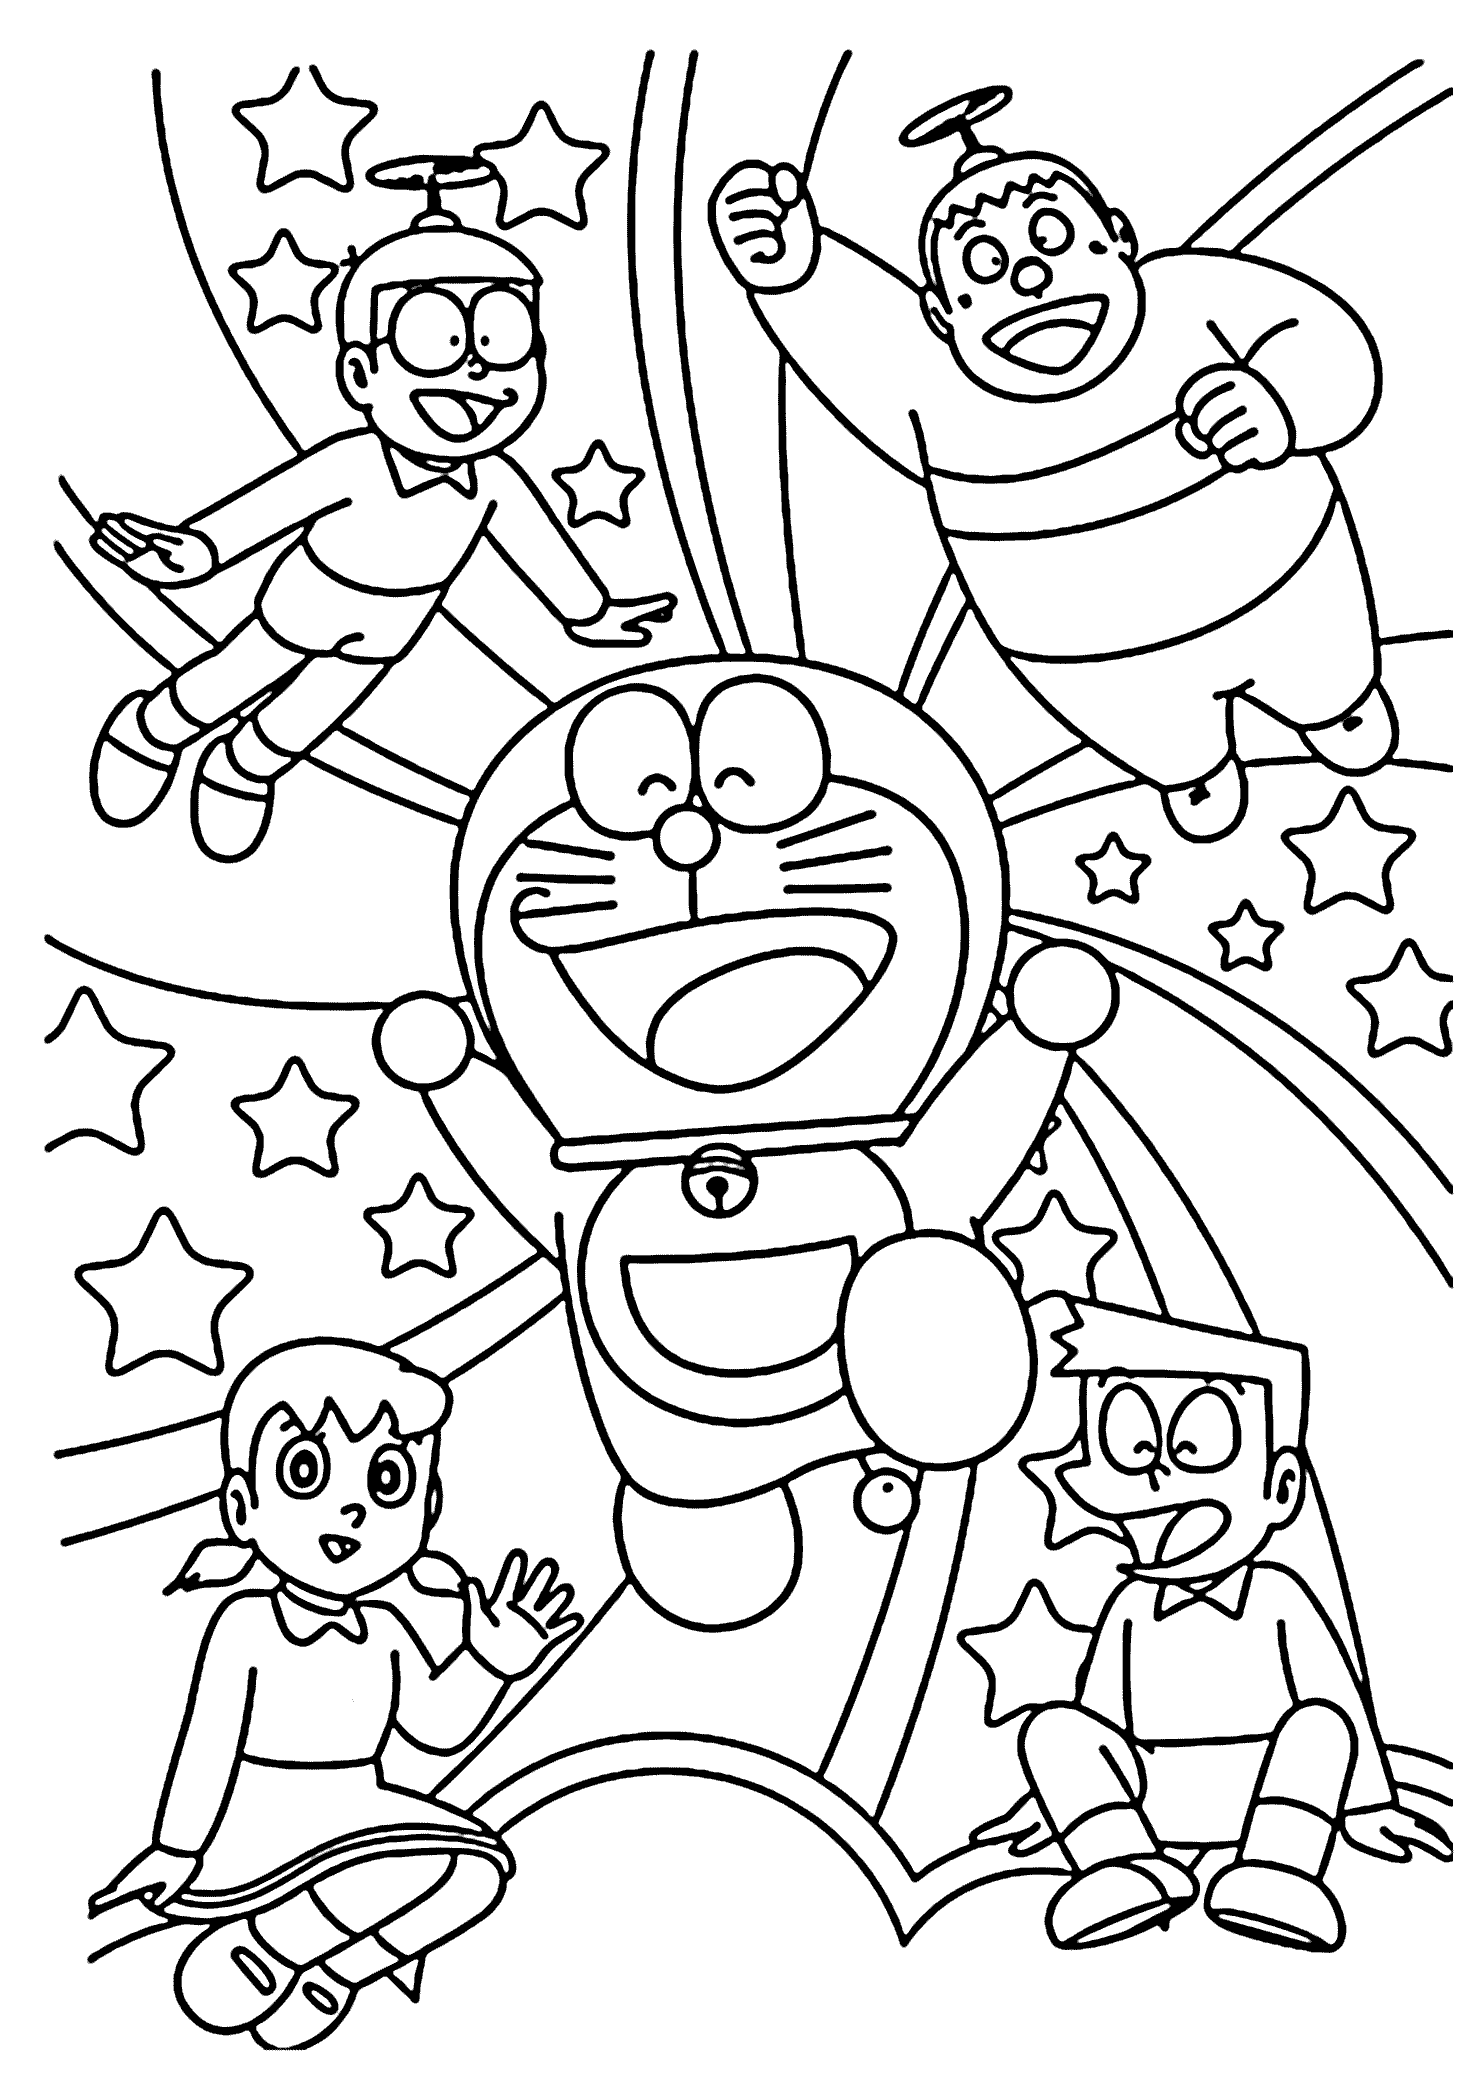 Doraemon Coloring Pages to download and print for free